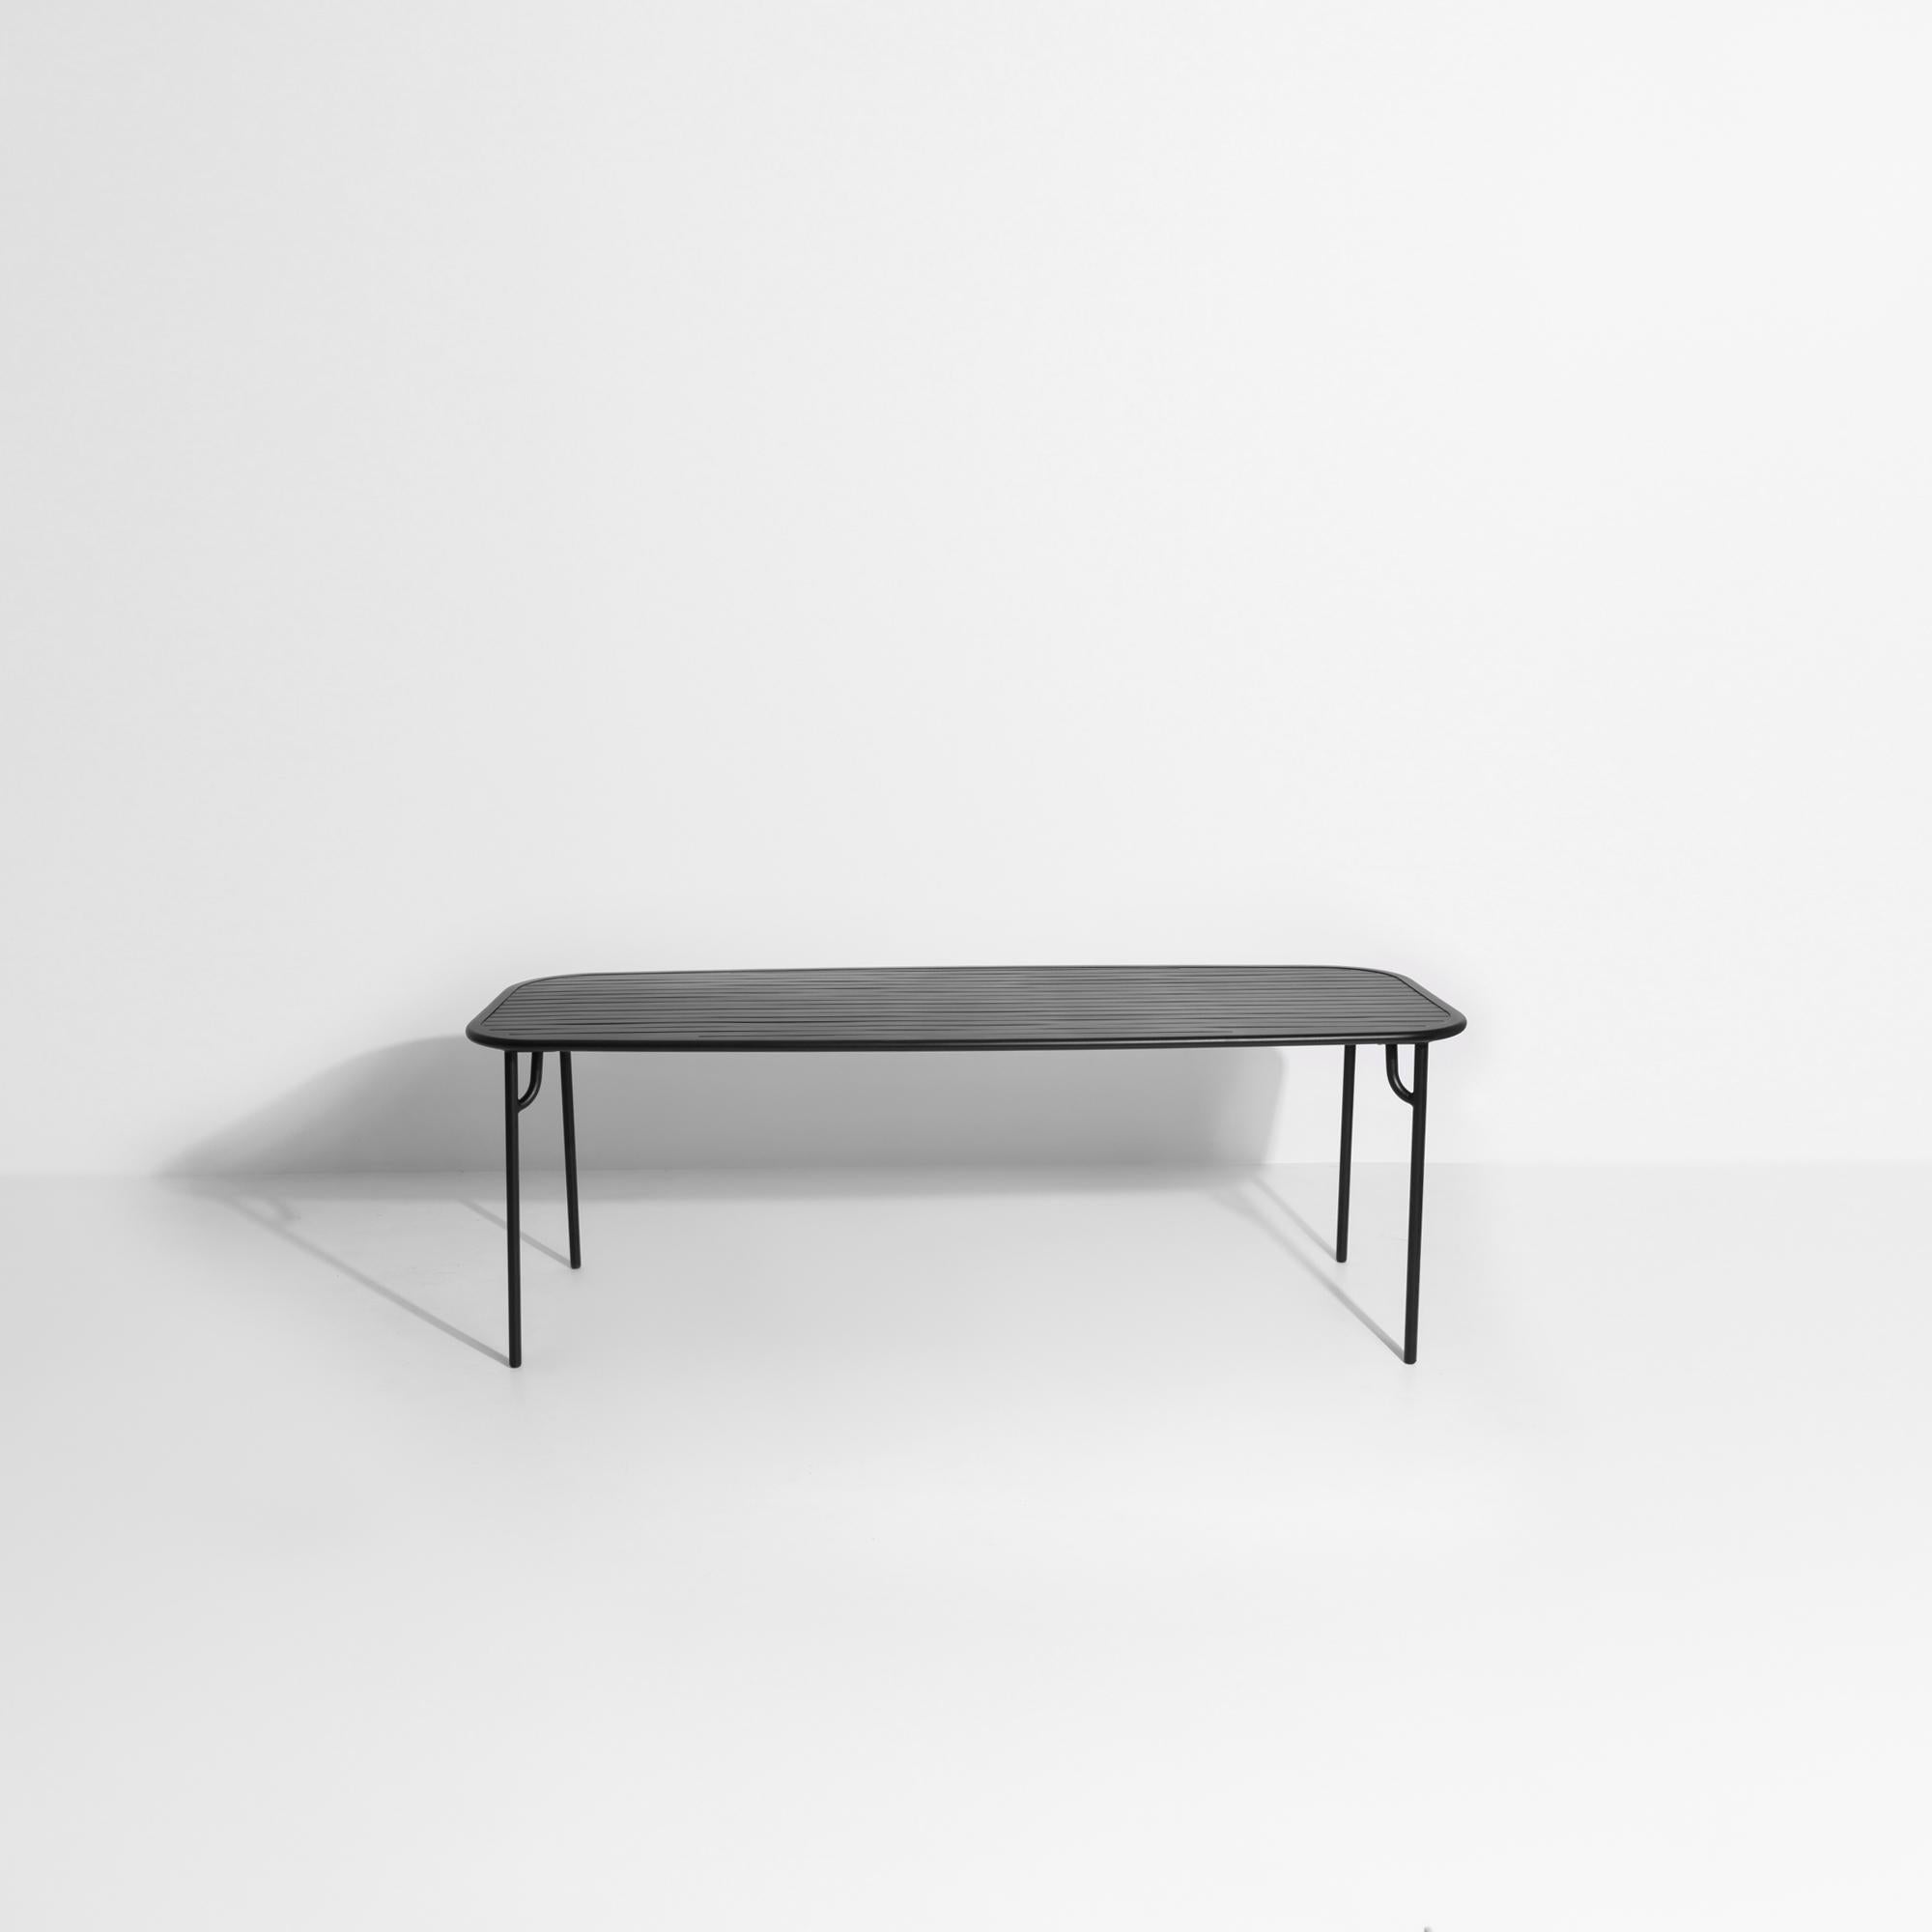 Petite Friture Week-End Large Rectangular Dining Table in Black with Slats In New Condition For Sale In Brooklyn, NY